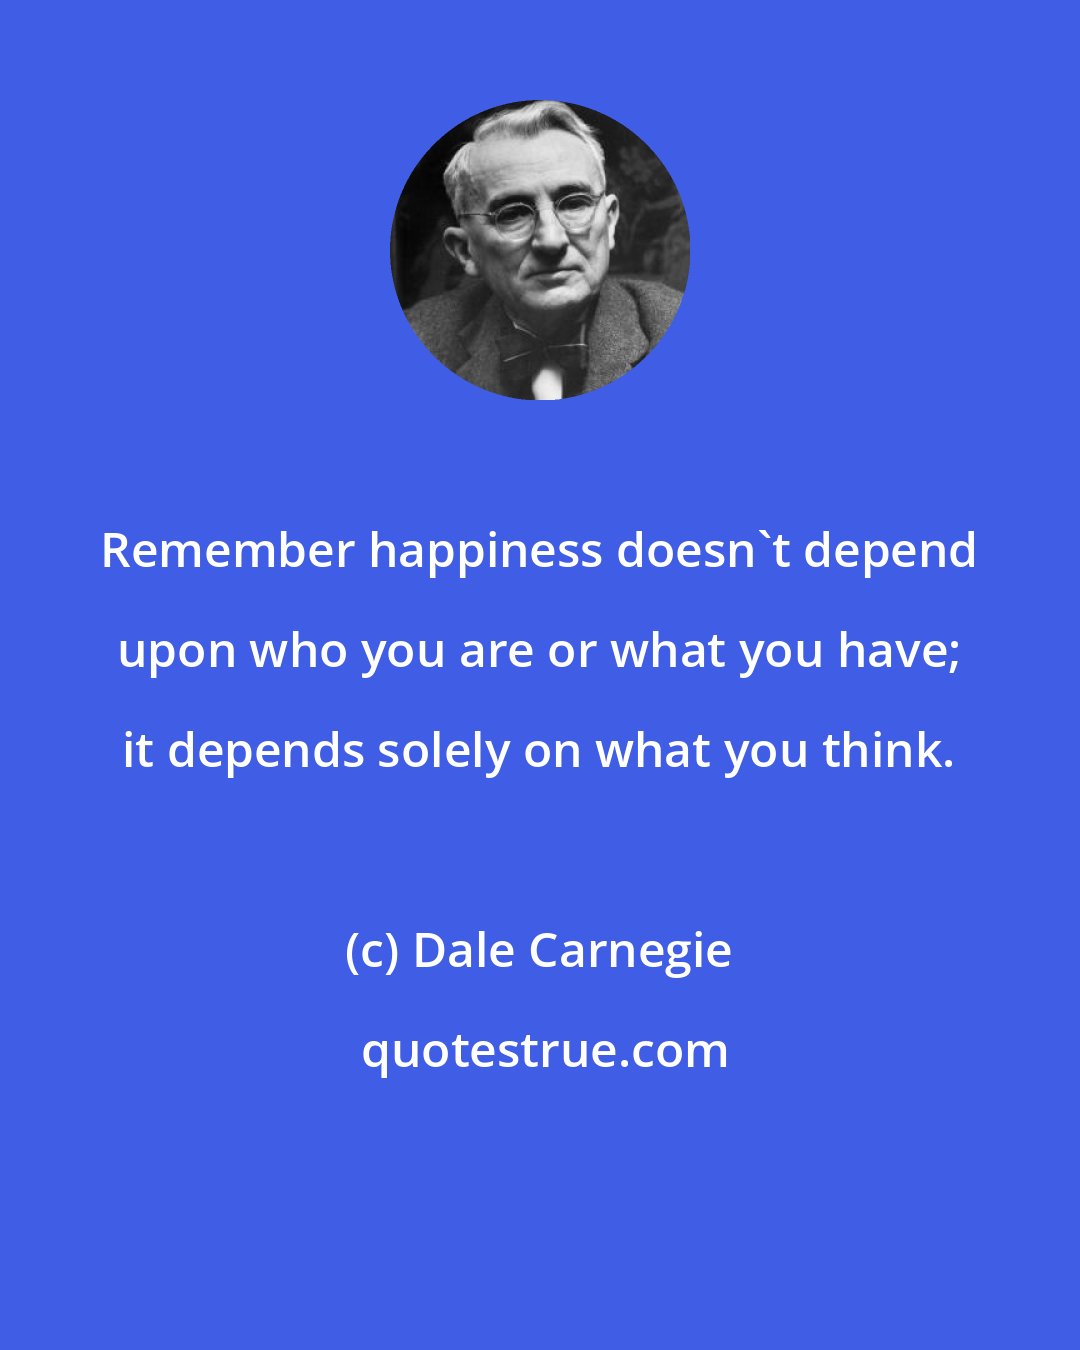 Dale Carnegie: Remember happiness doesn't depend upon who you are or what you have; it depends solely on what you think.